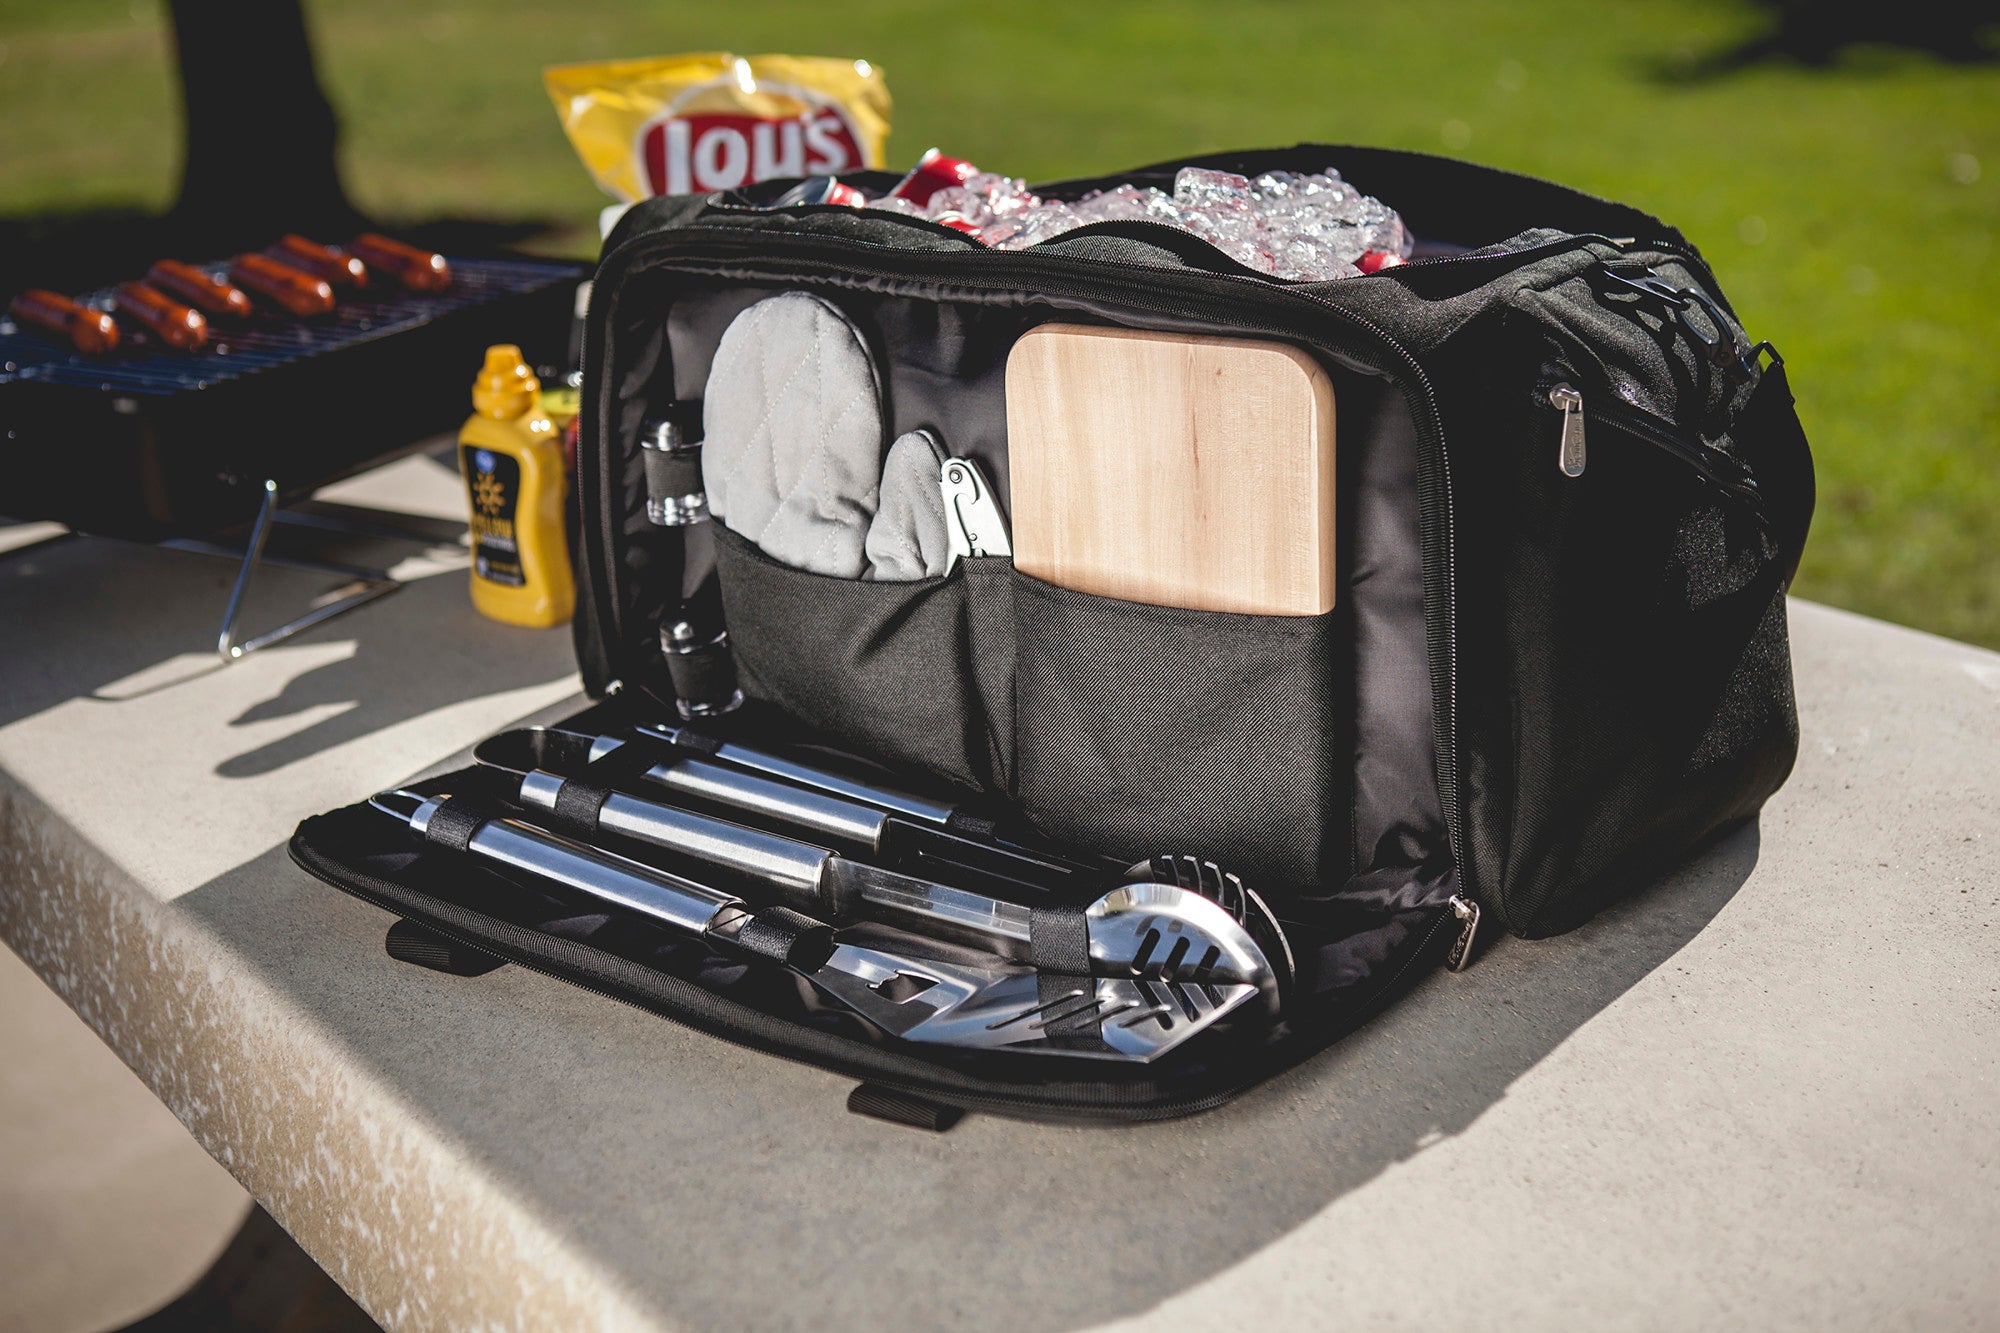 BBQ Kit Grill Set and Cooler - Ultimate Portable Grilling